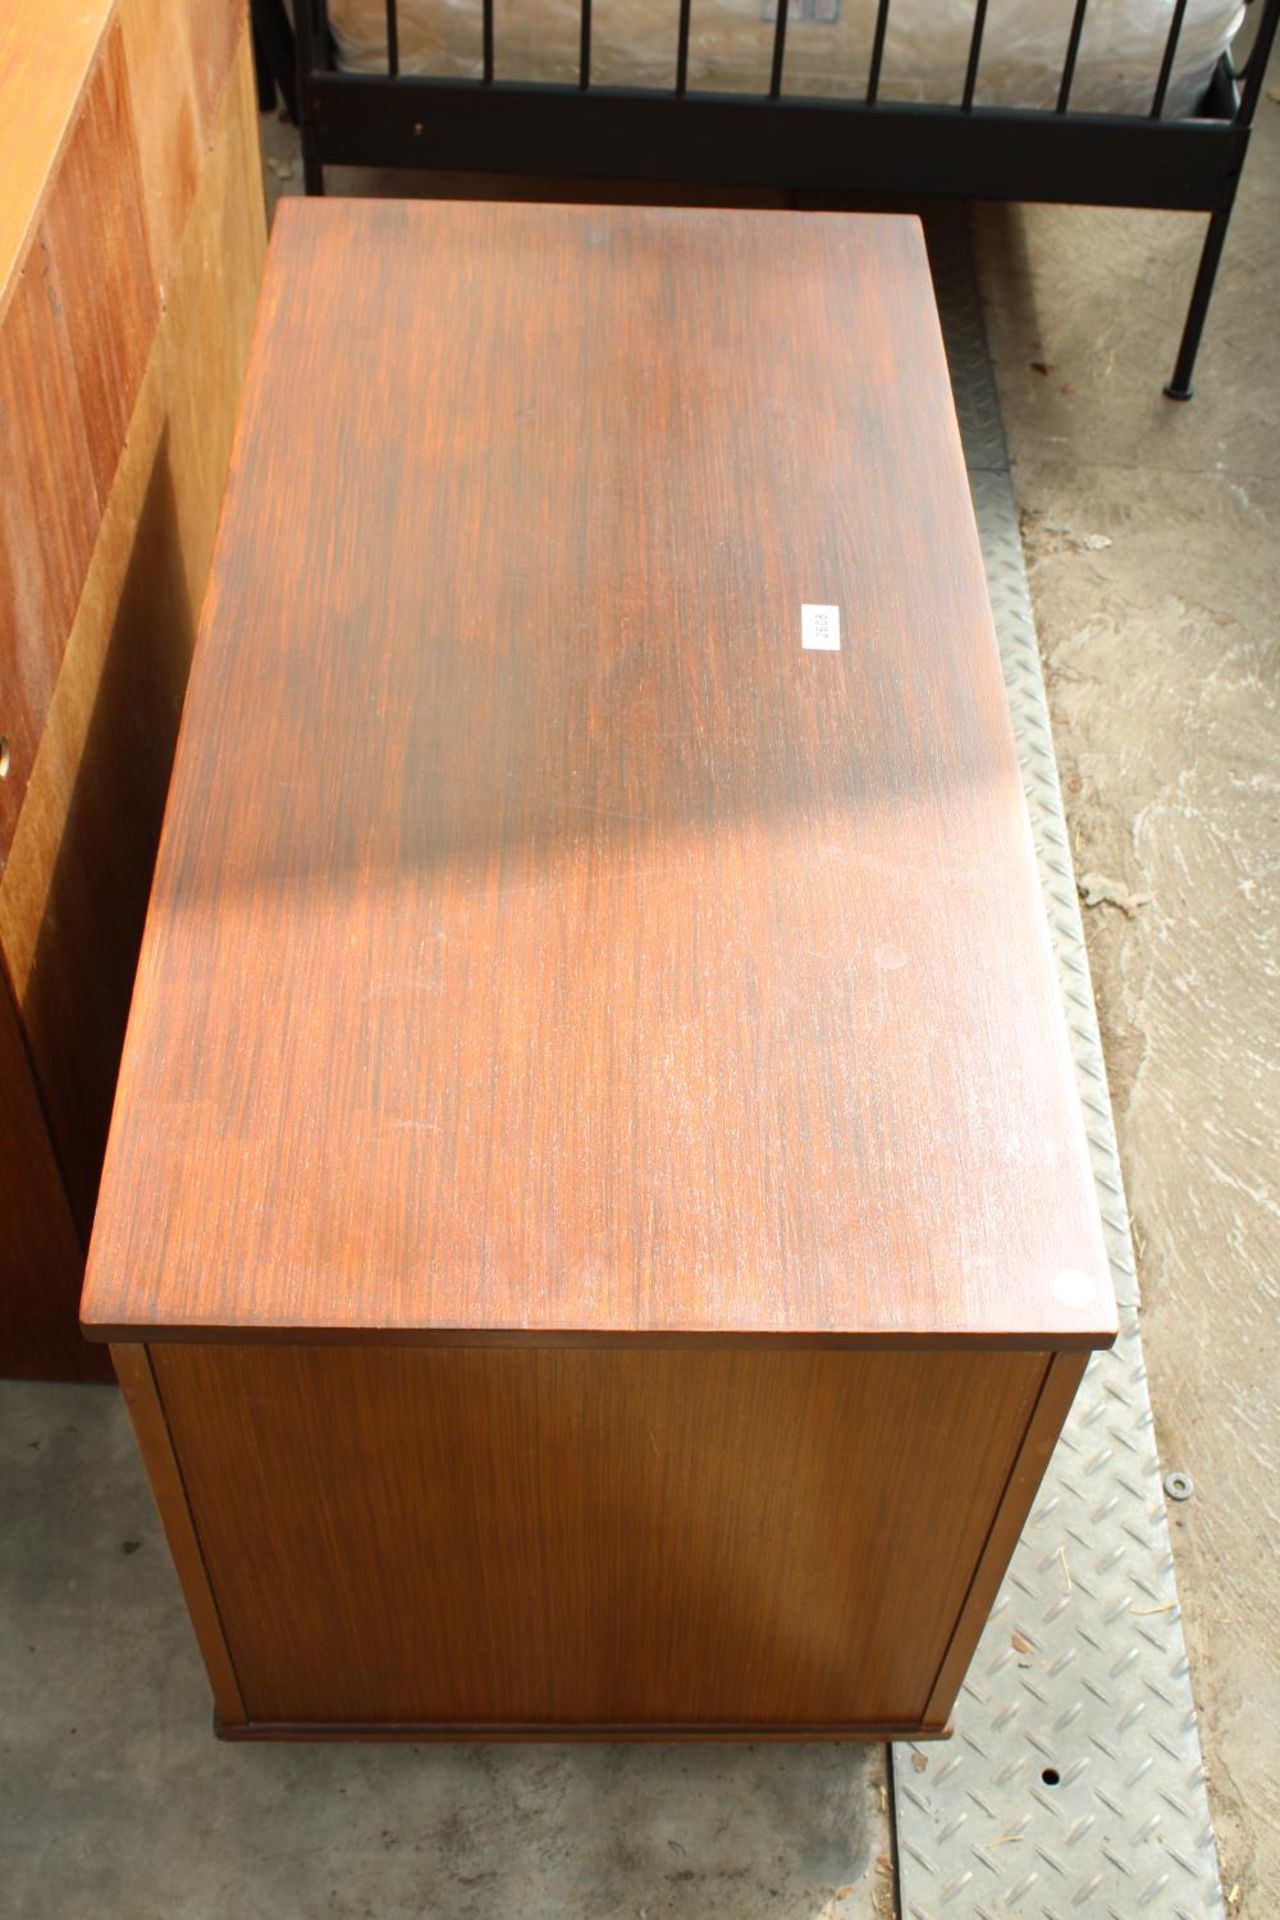 A RETRO TEAK BLANKET CHEST 36" WIDE - Image 3 of 3